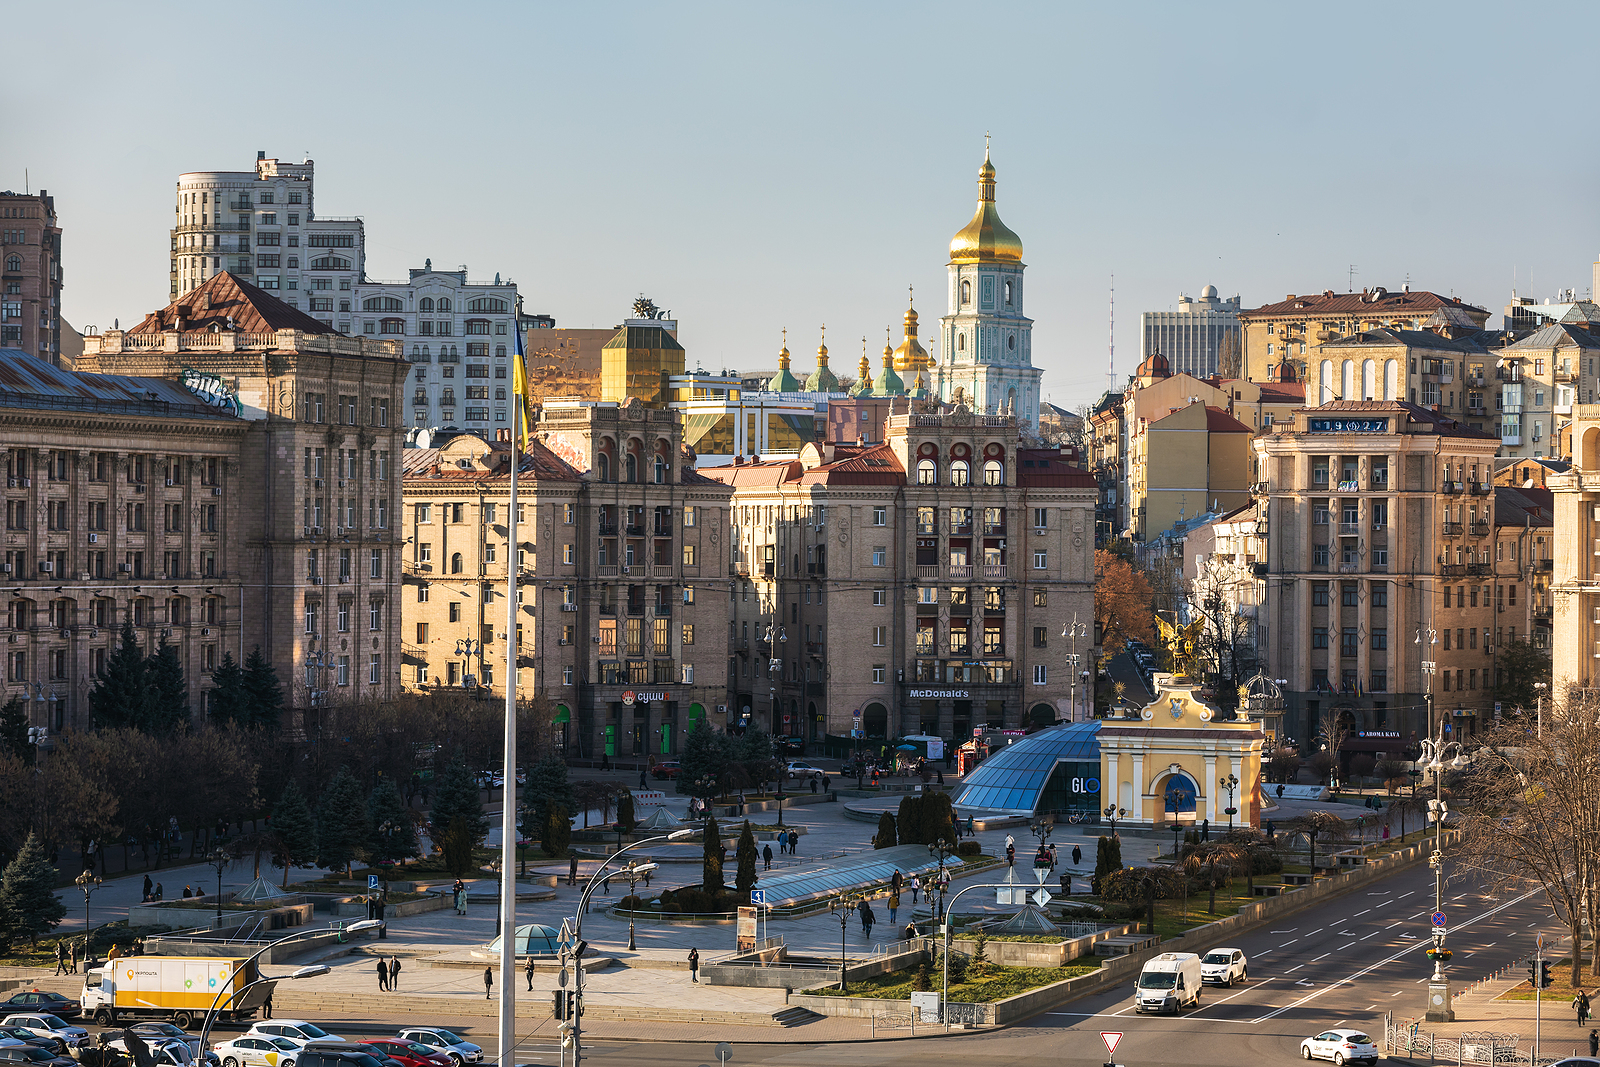 ahmed bahy el din recommends pictures of kiev, ukraine pic